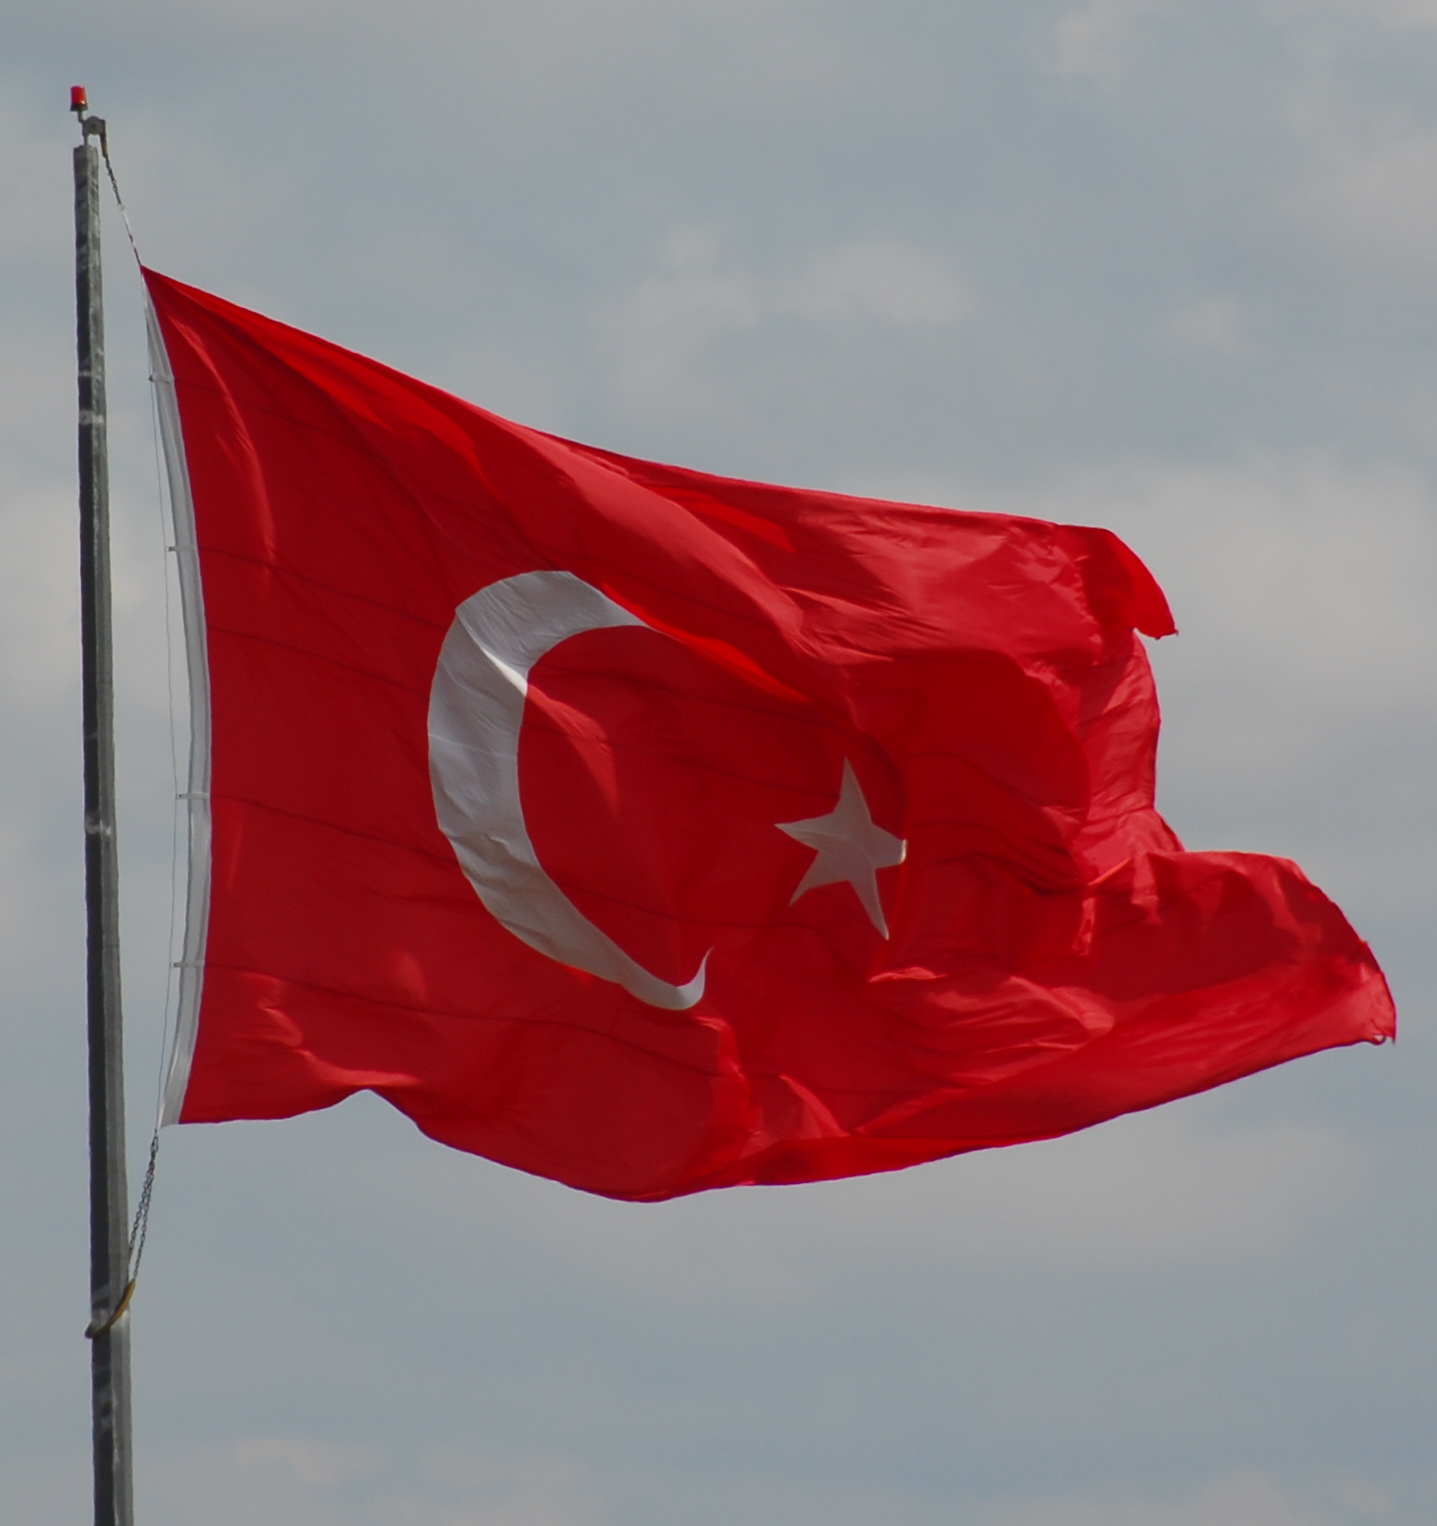 the turkish flag is flying in front of a cloudy sky